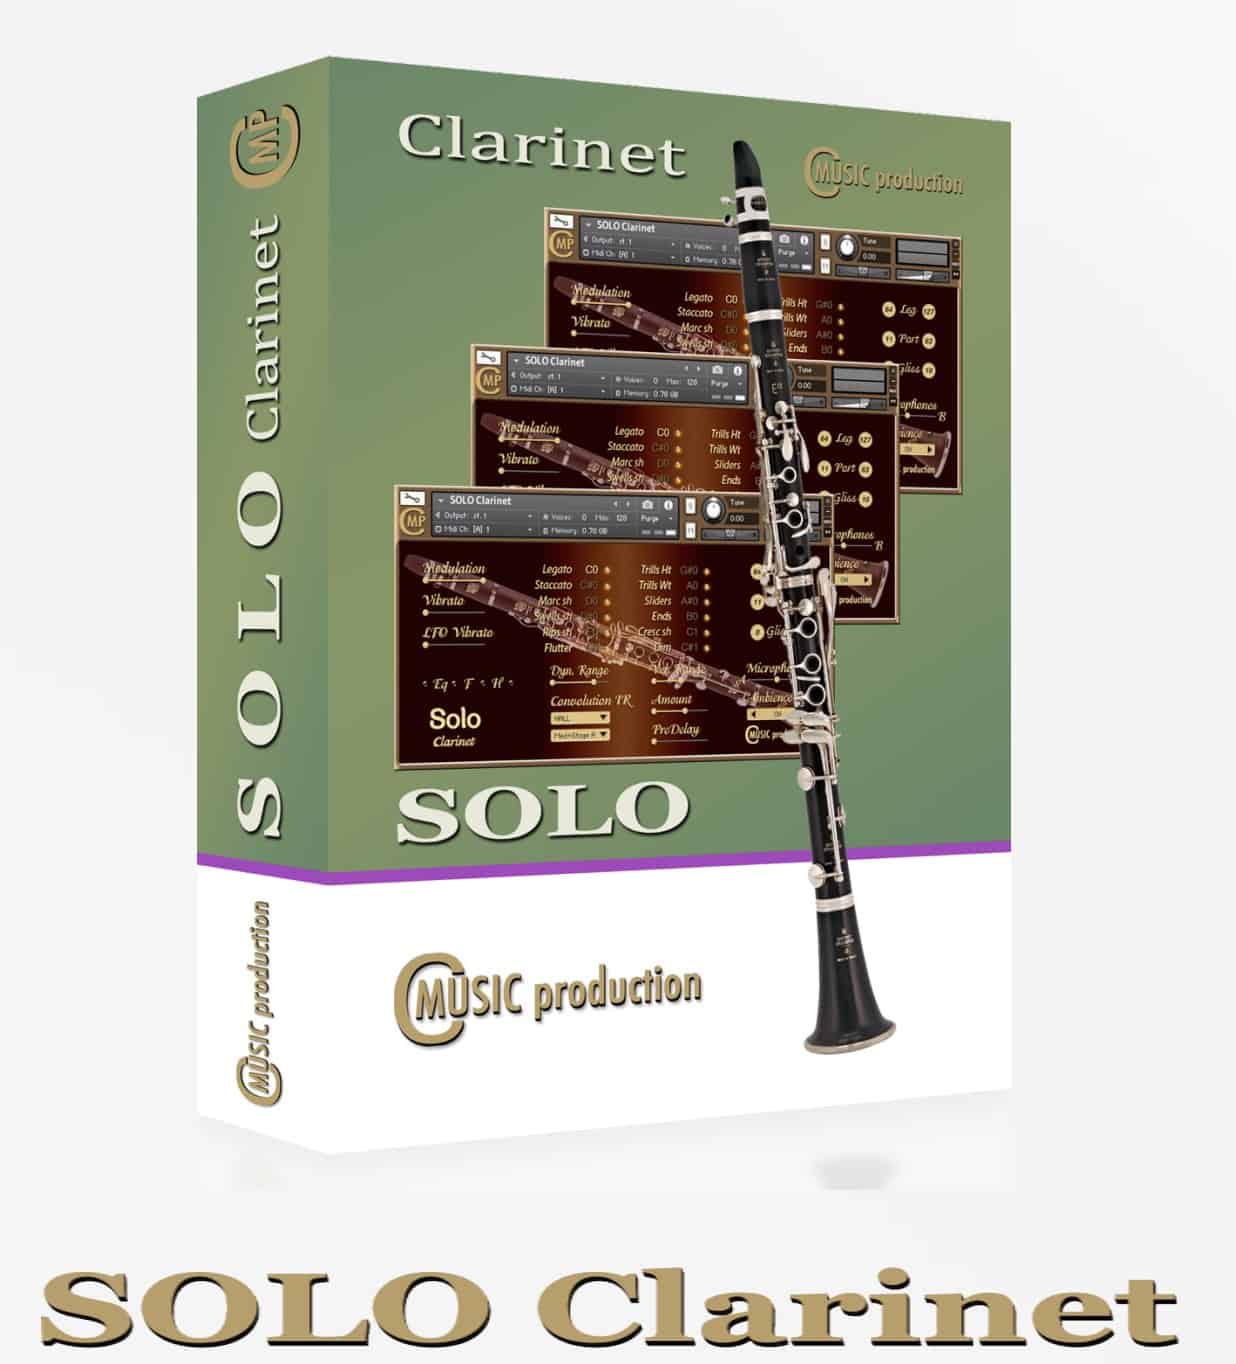 SOLO Clarinet in B Library for Kontakt.